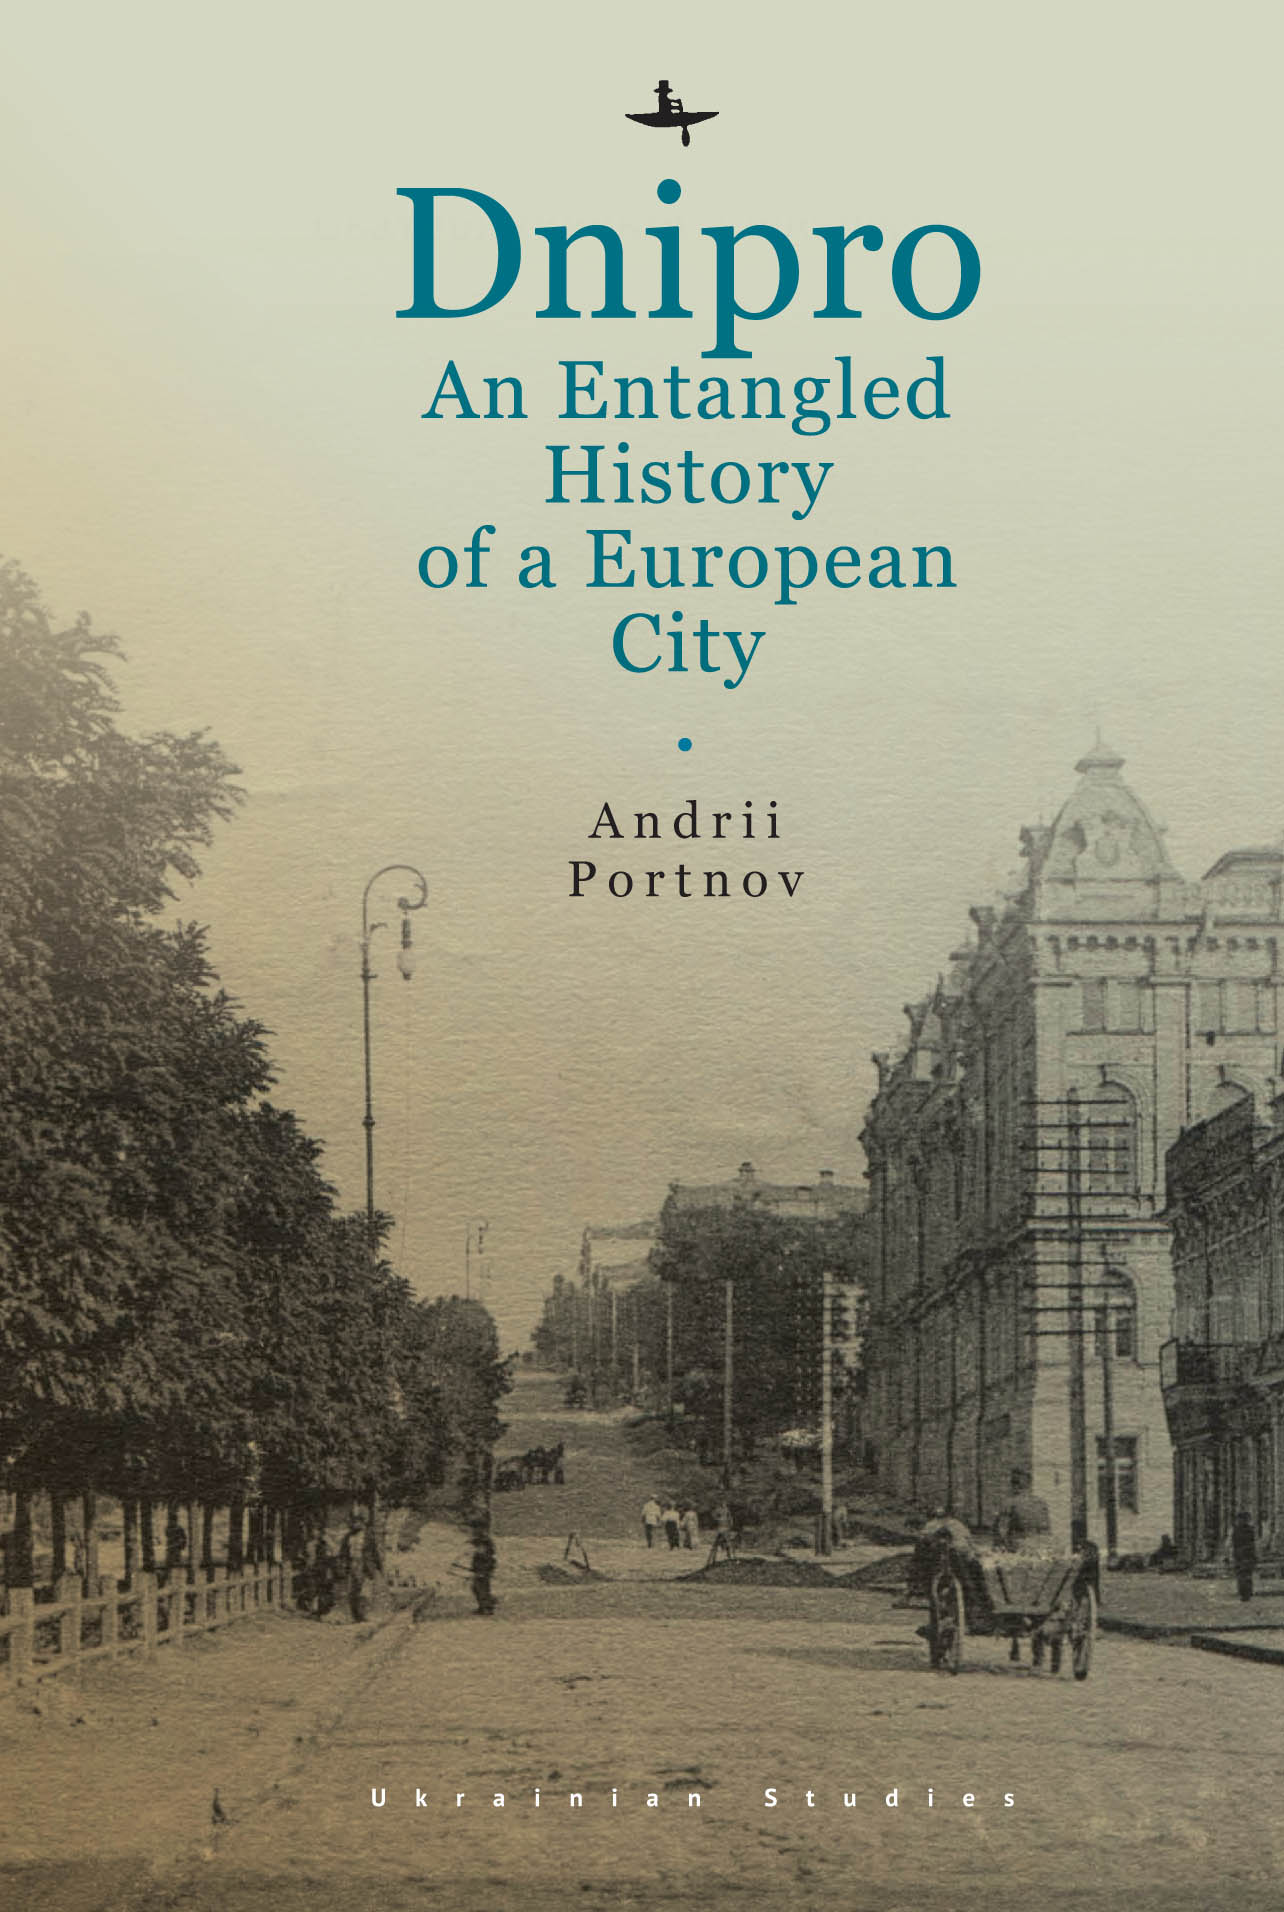 Dnipro. An Entangled History of a European City